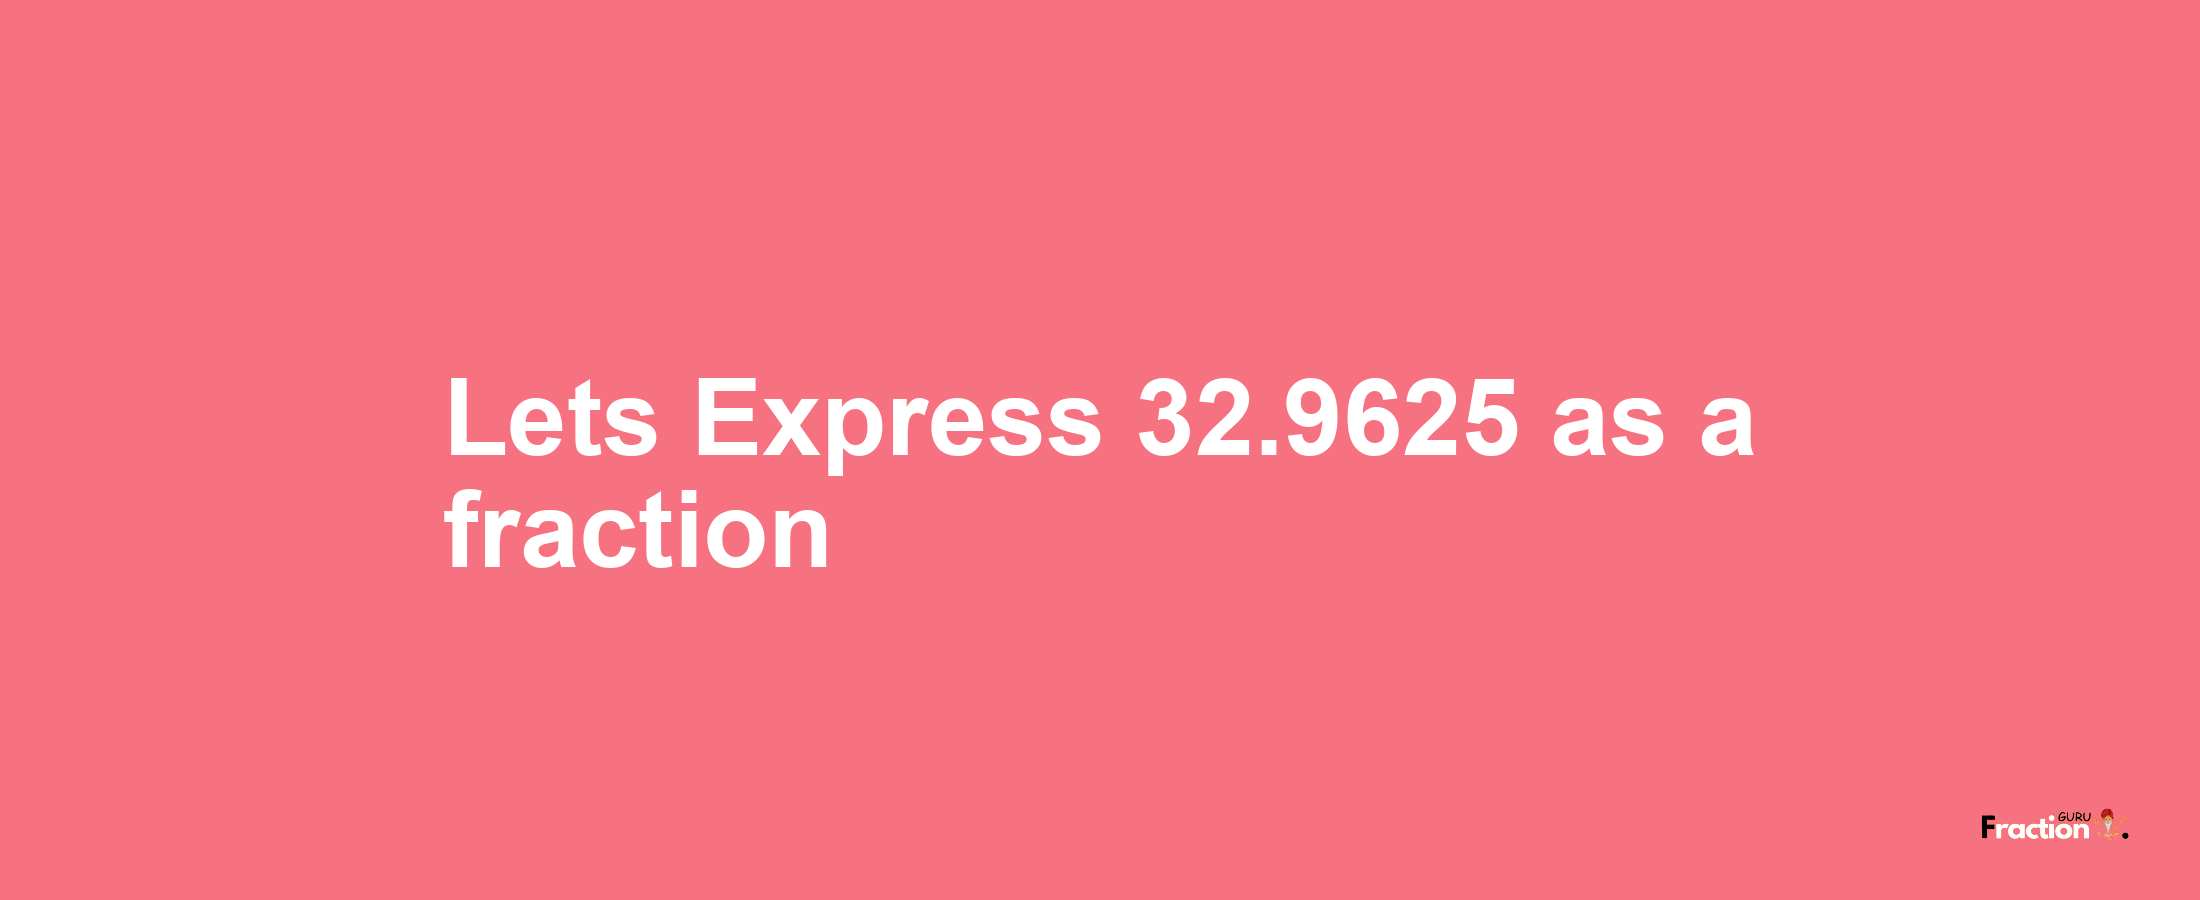 Lets Express 32.9625 as afraction